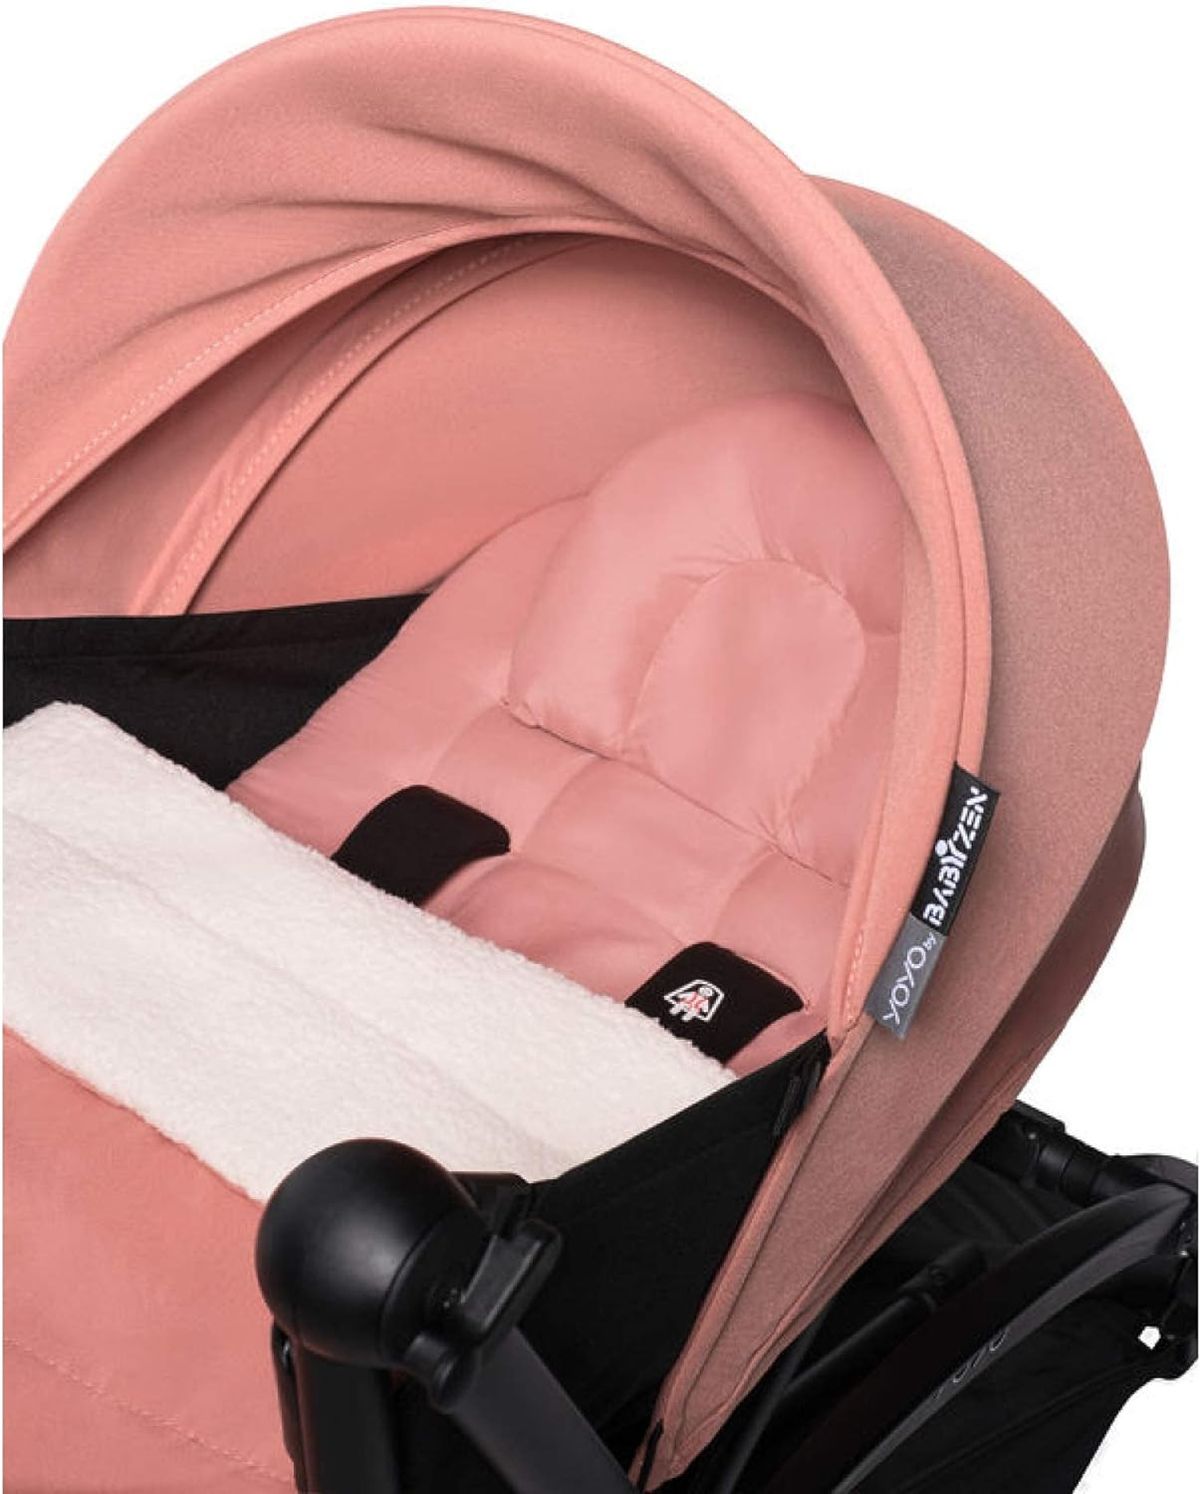 BABYZEN YOYO 0+ Newborn Pack, Black - Includes Mattress, Canopy, Head  Support & Foot Cover - Requires YOYO2 Frame (Sold Separately)